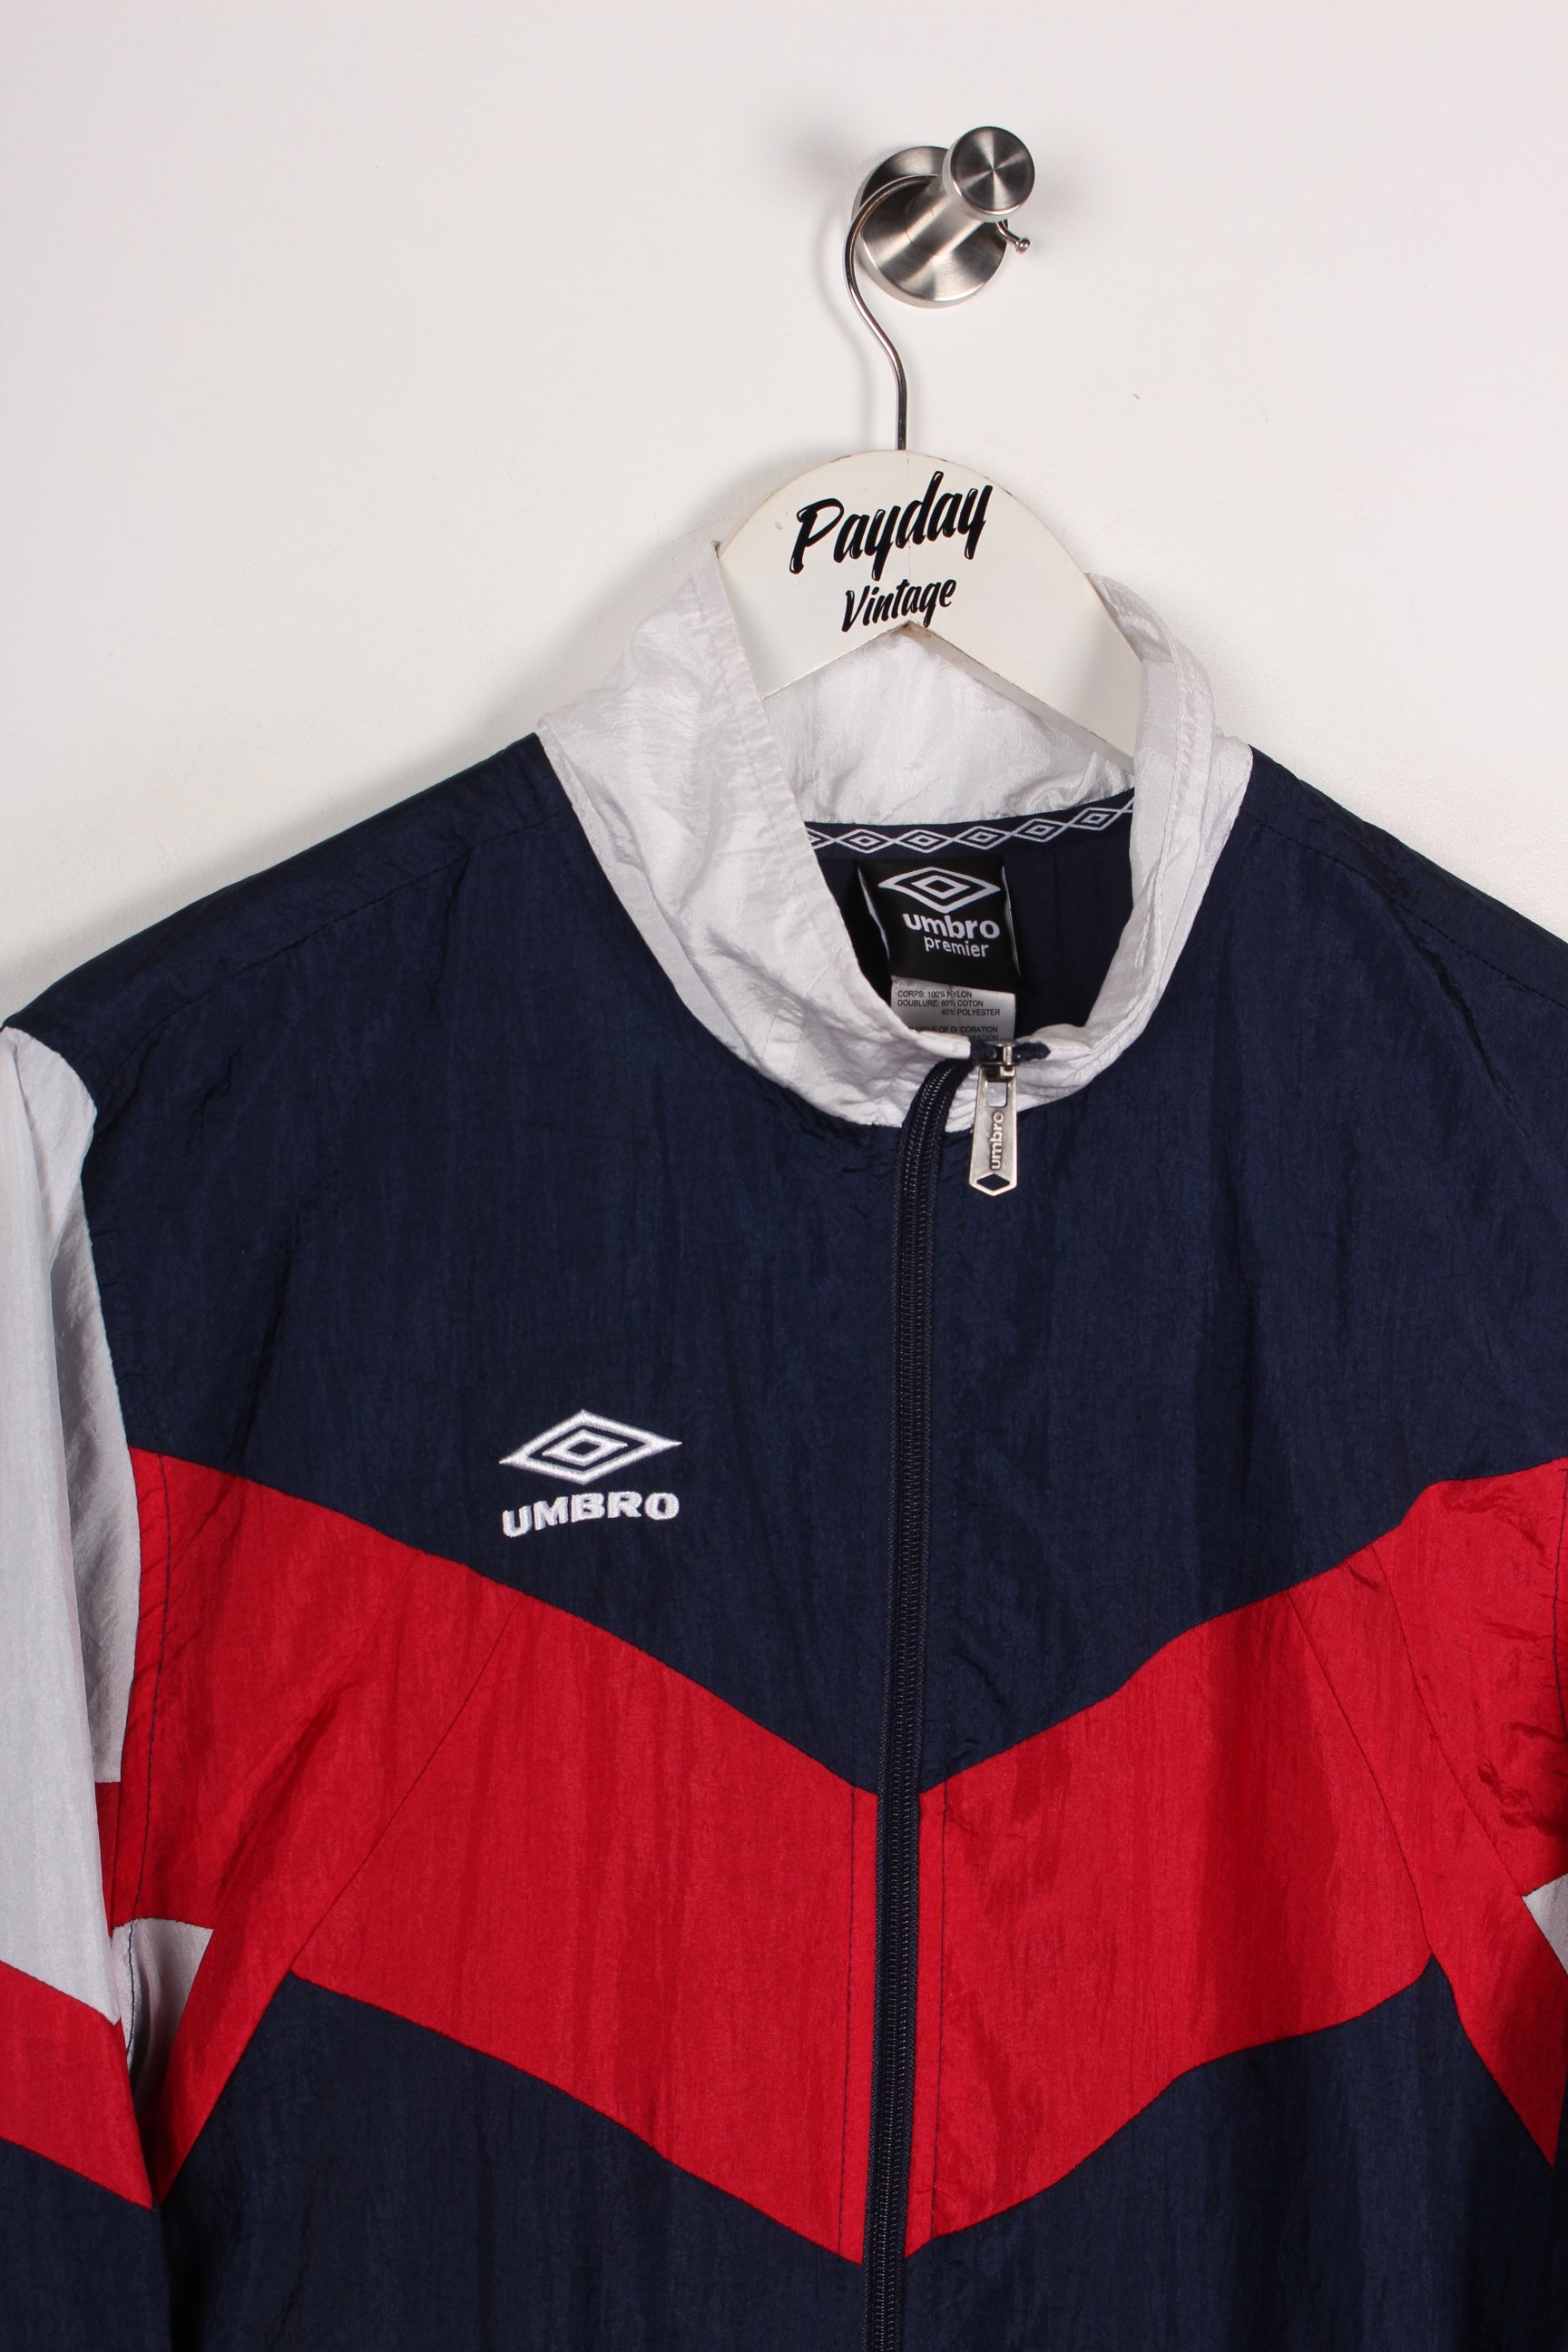 Umbro Track Jacket Navy/Red Small – Payday Vintage